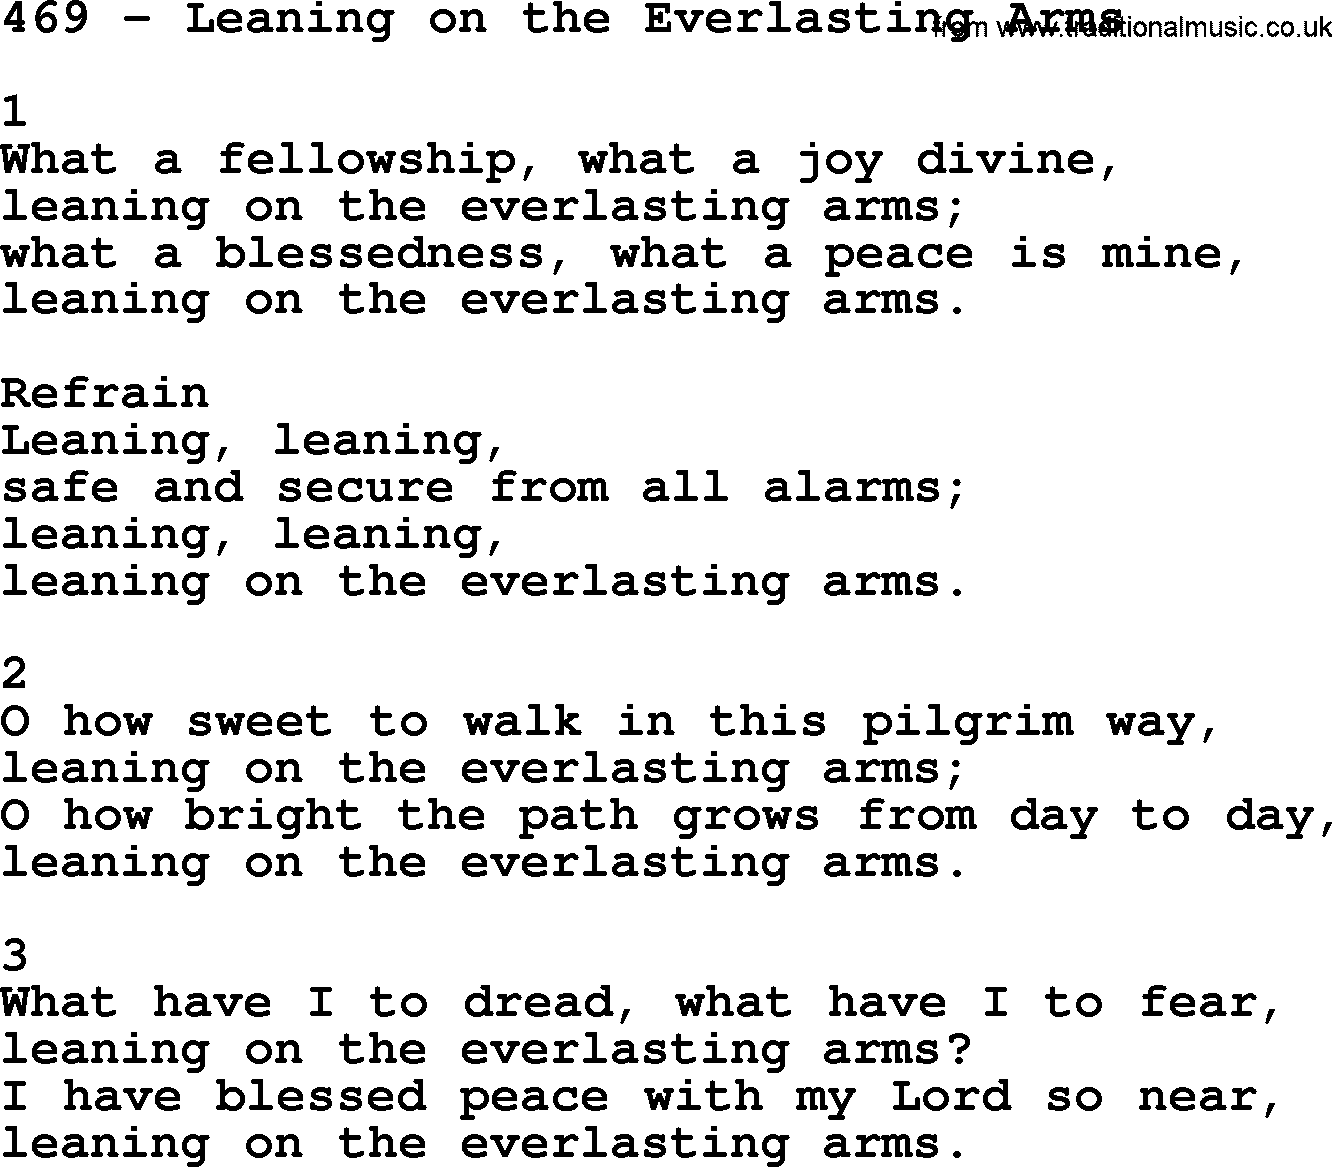 Complete Adventis Hymnal, title: 469-Leaning On The Everlasting Arms, with lyrics, midi, mp3, powerpoints(PPT) and PDF,